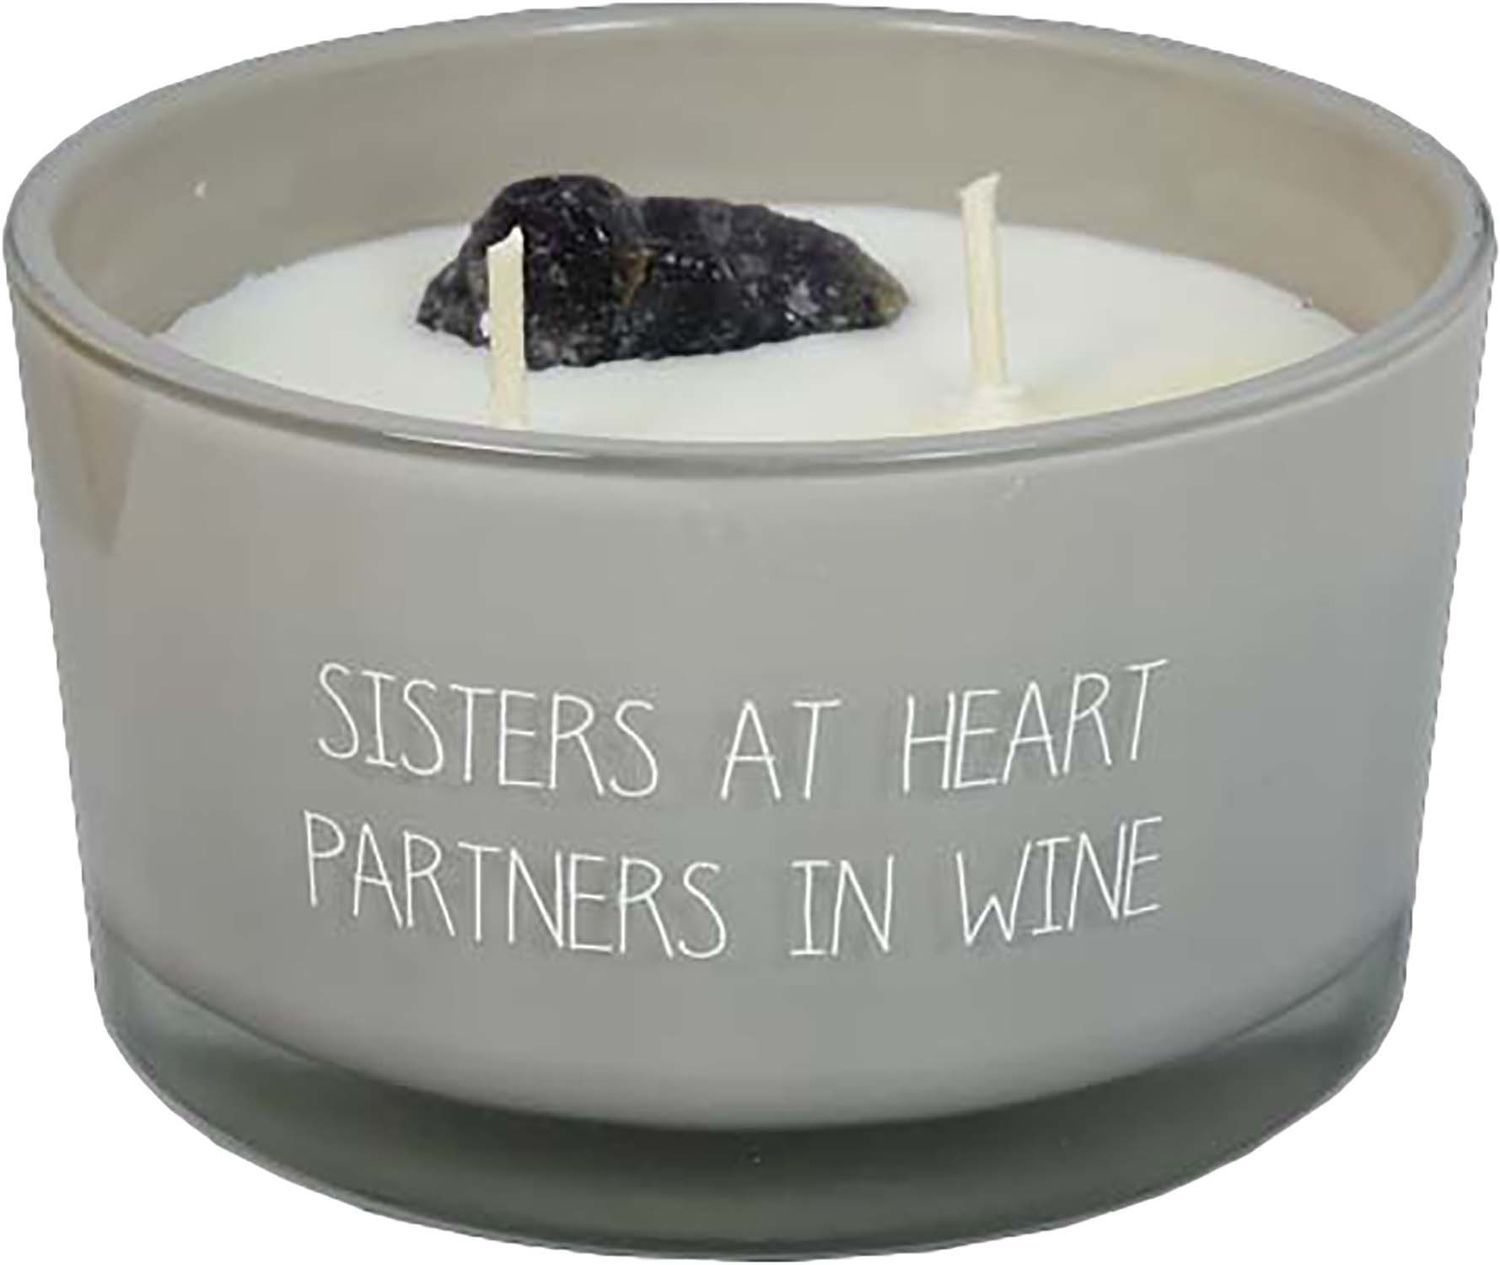 Sojakaars - Sisters at heart, partners in wine - A Grijs